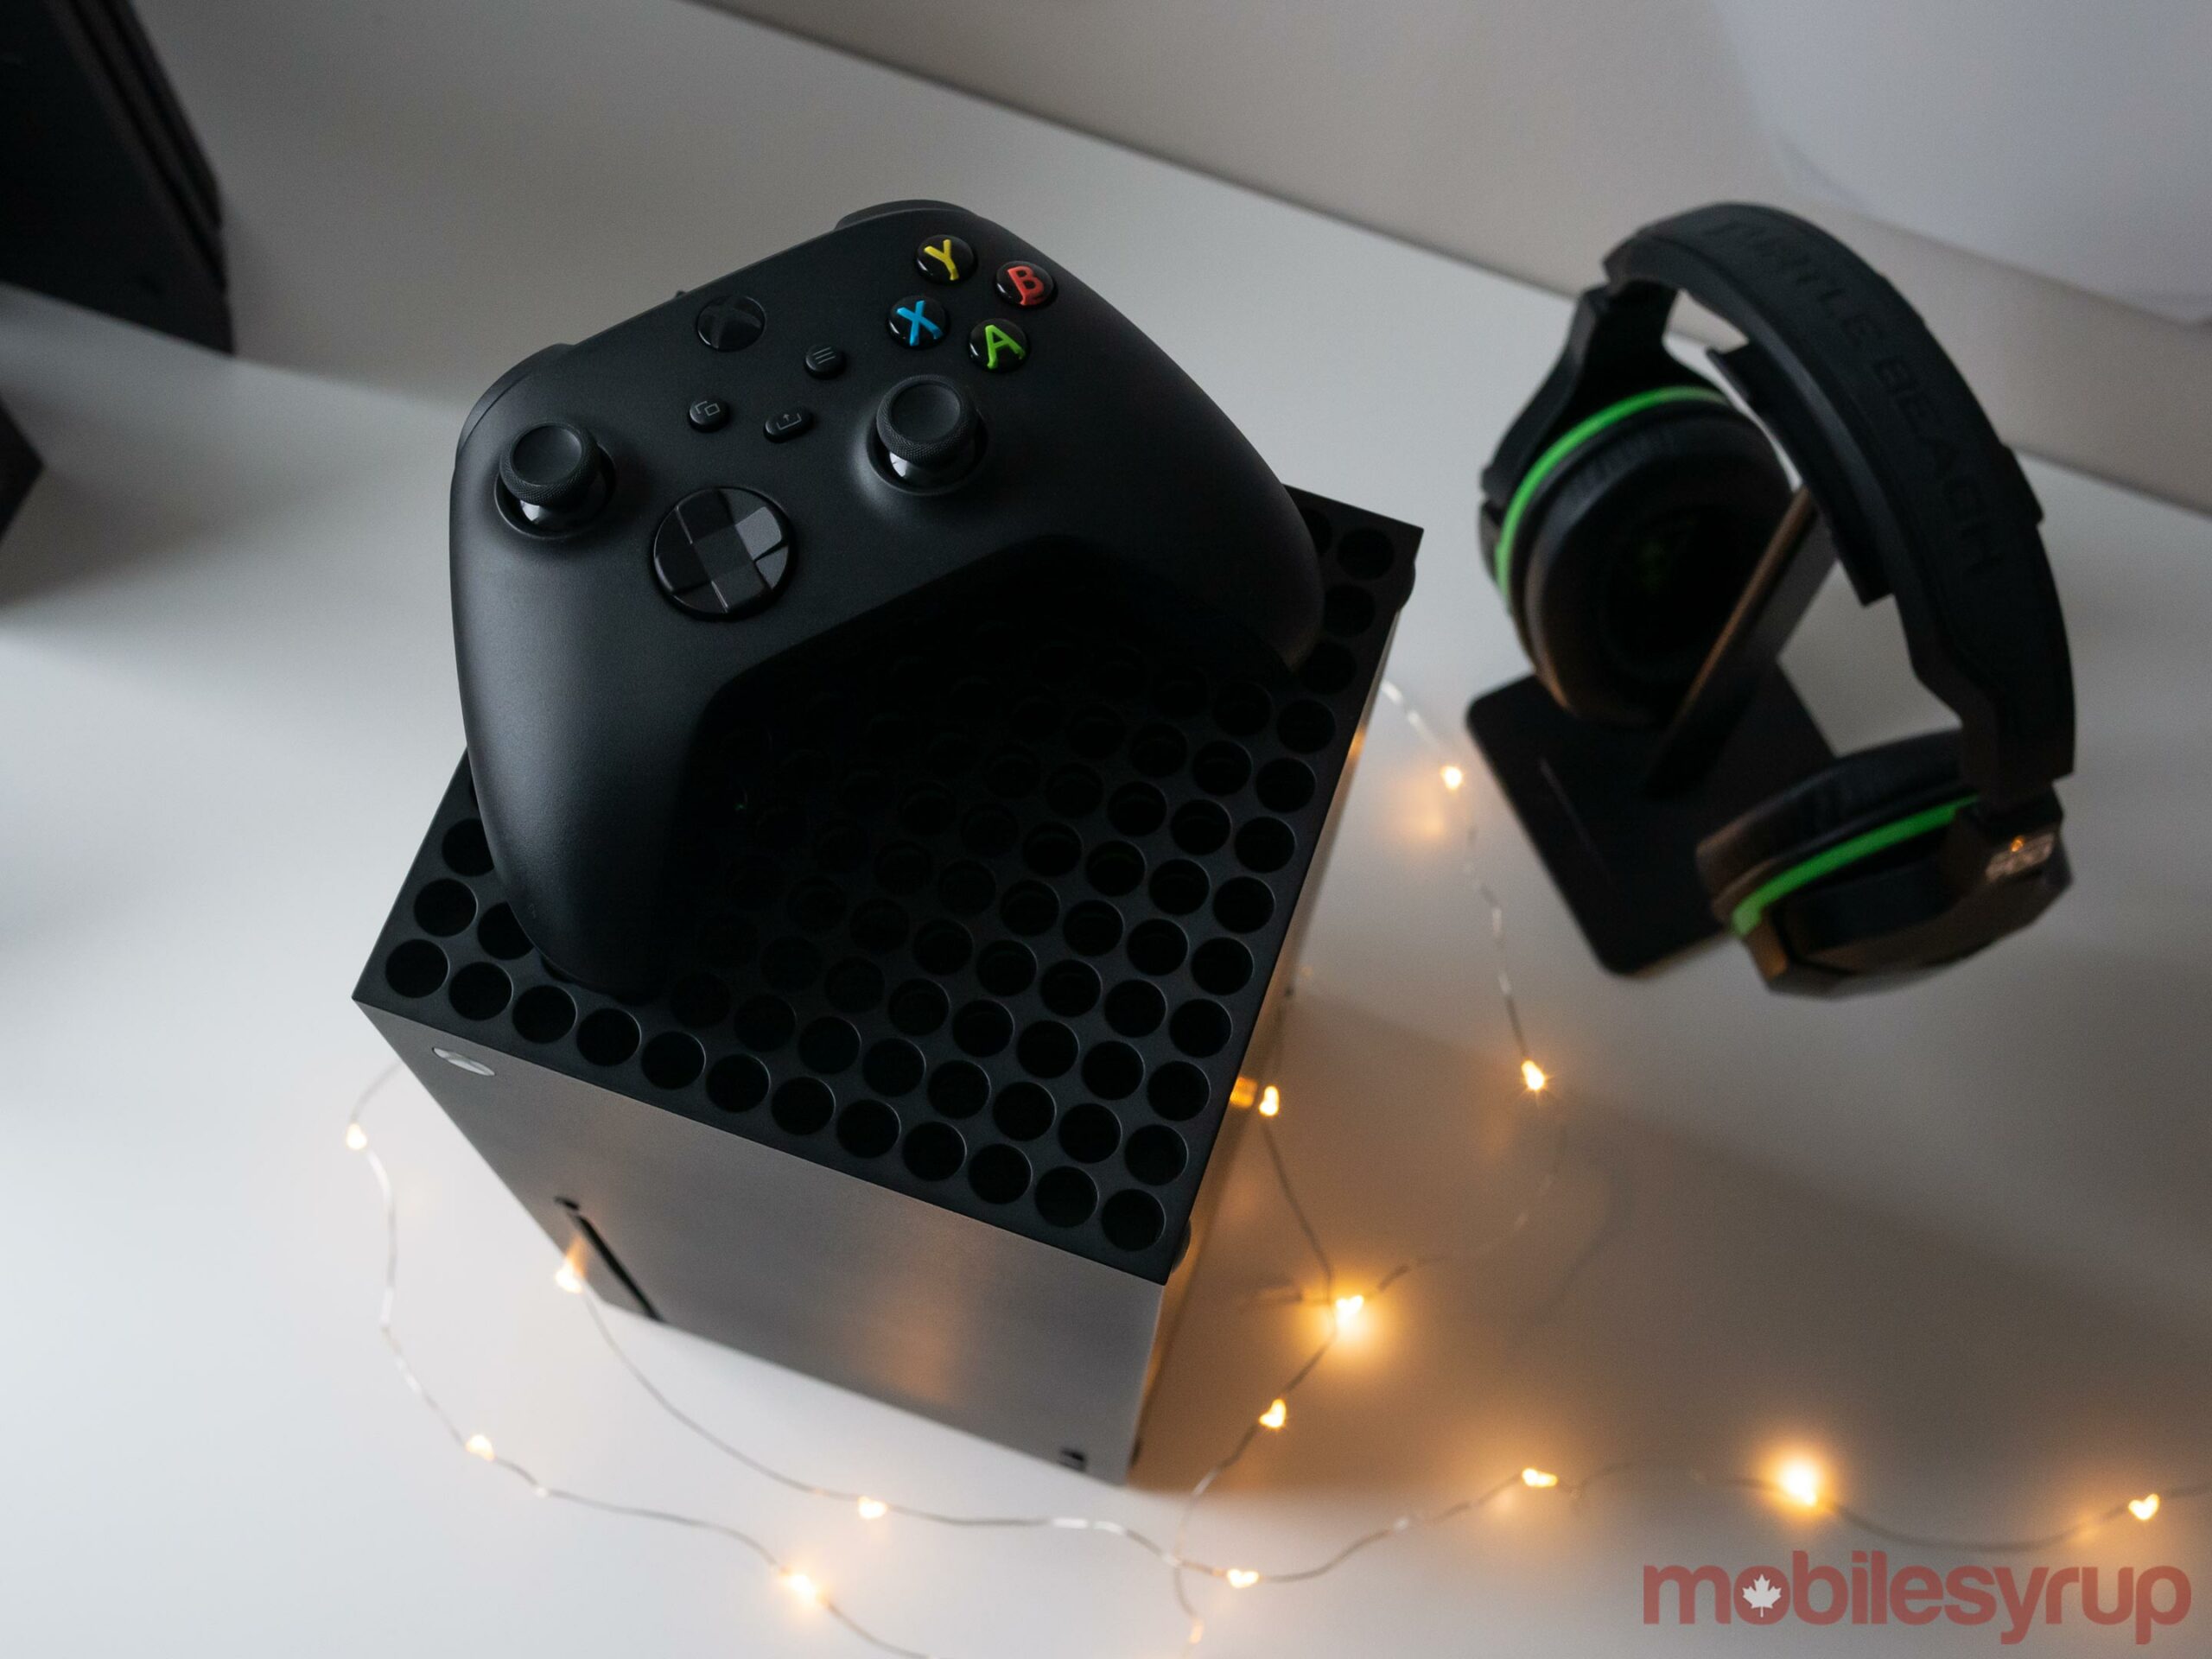 Xbox Series X with gamepad on top of it